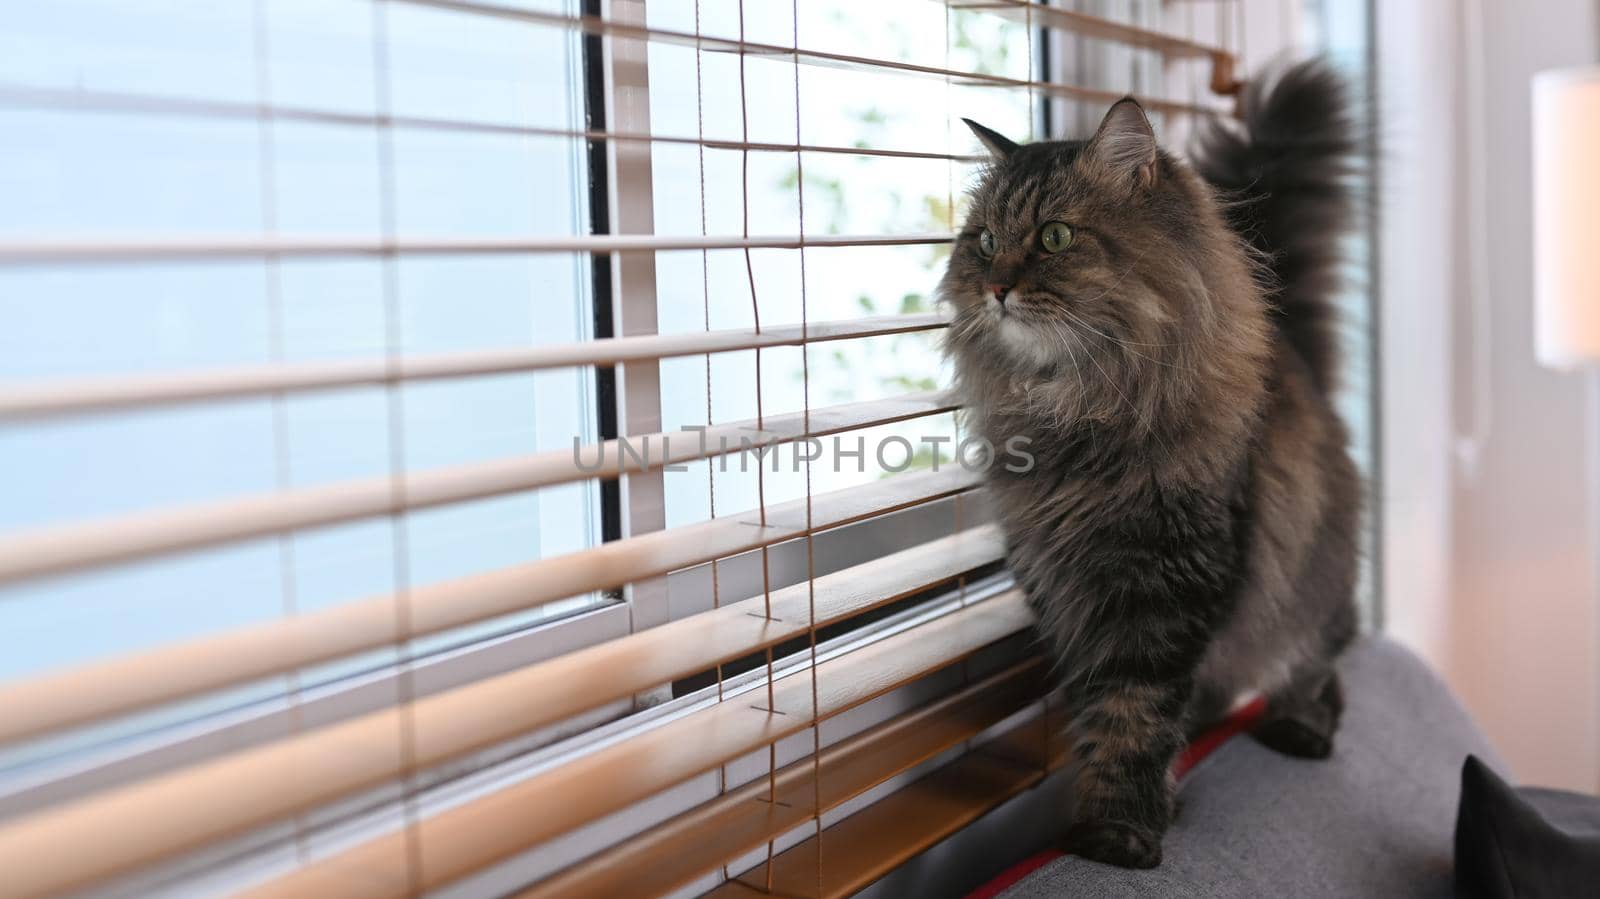 A cute domestic cat standing on couch near the window blinds. Domestic life animals concept.